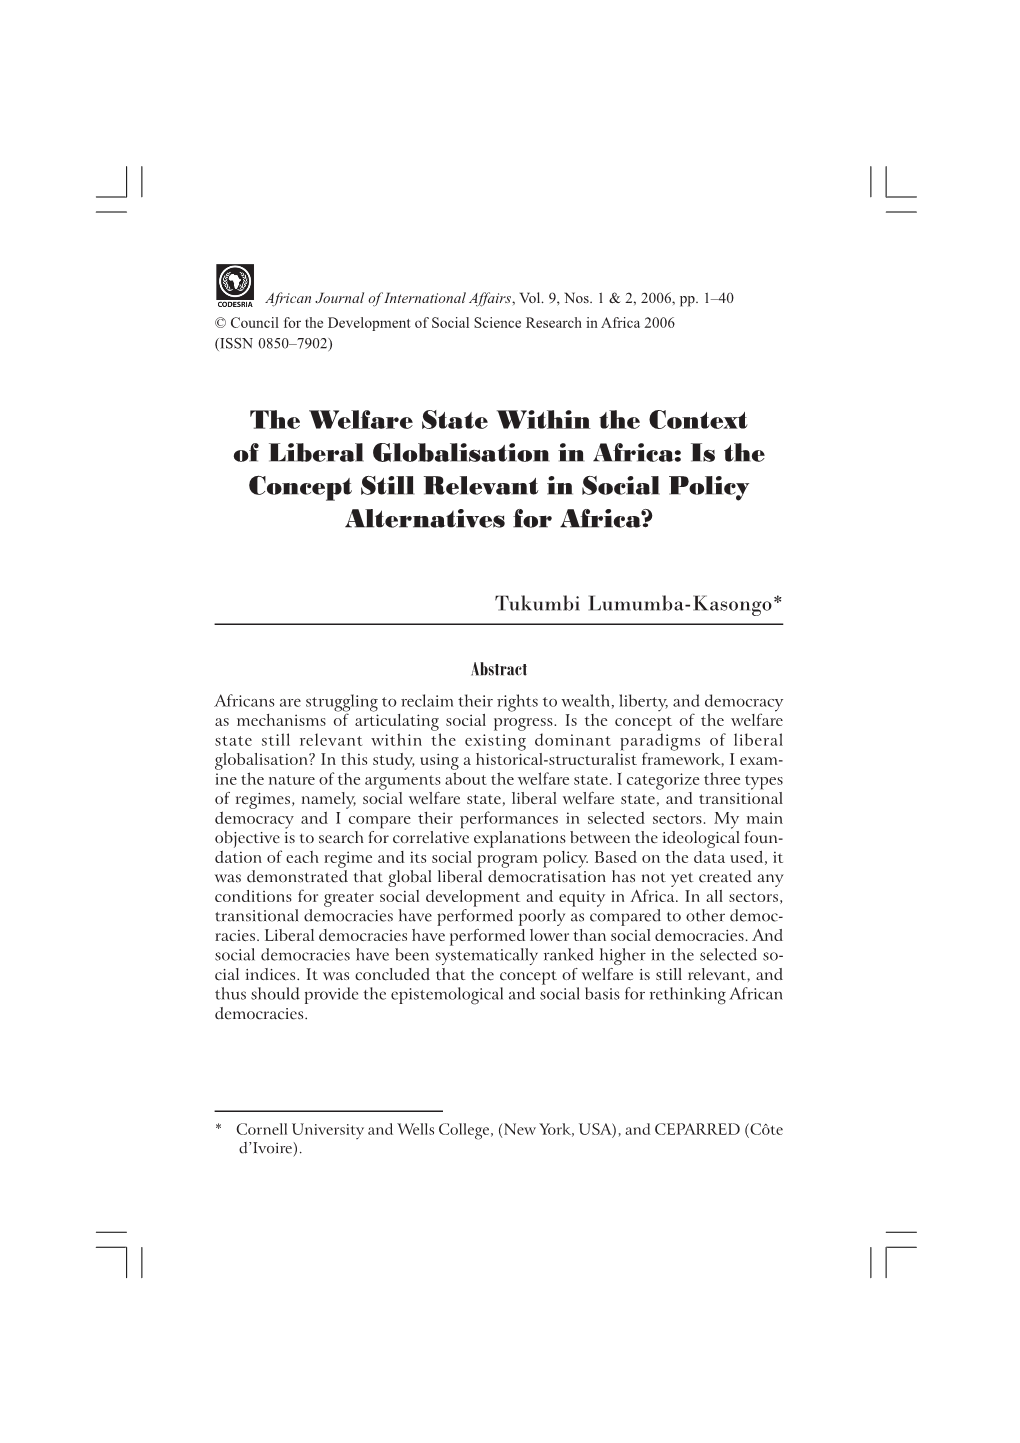 The Welfare State Within the Context of Liberal Globalisation in Africa: Is the Concept Still Relevant in Social Policy Alternatives for Africa?